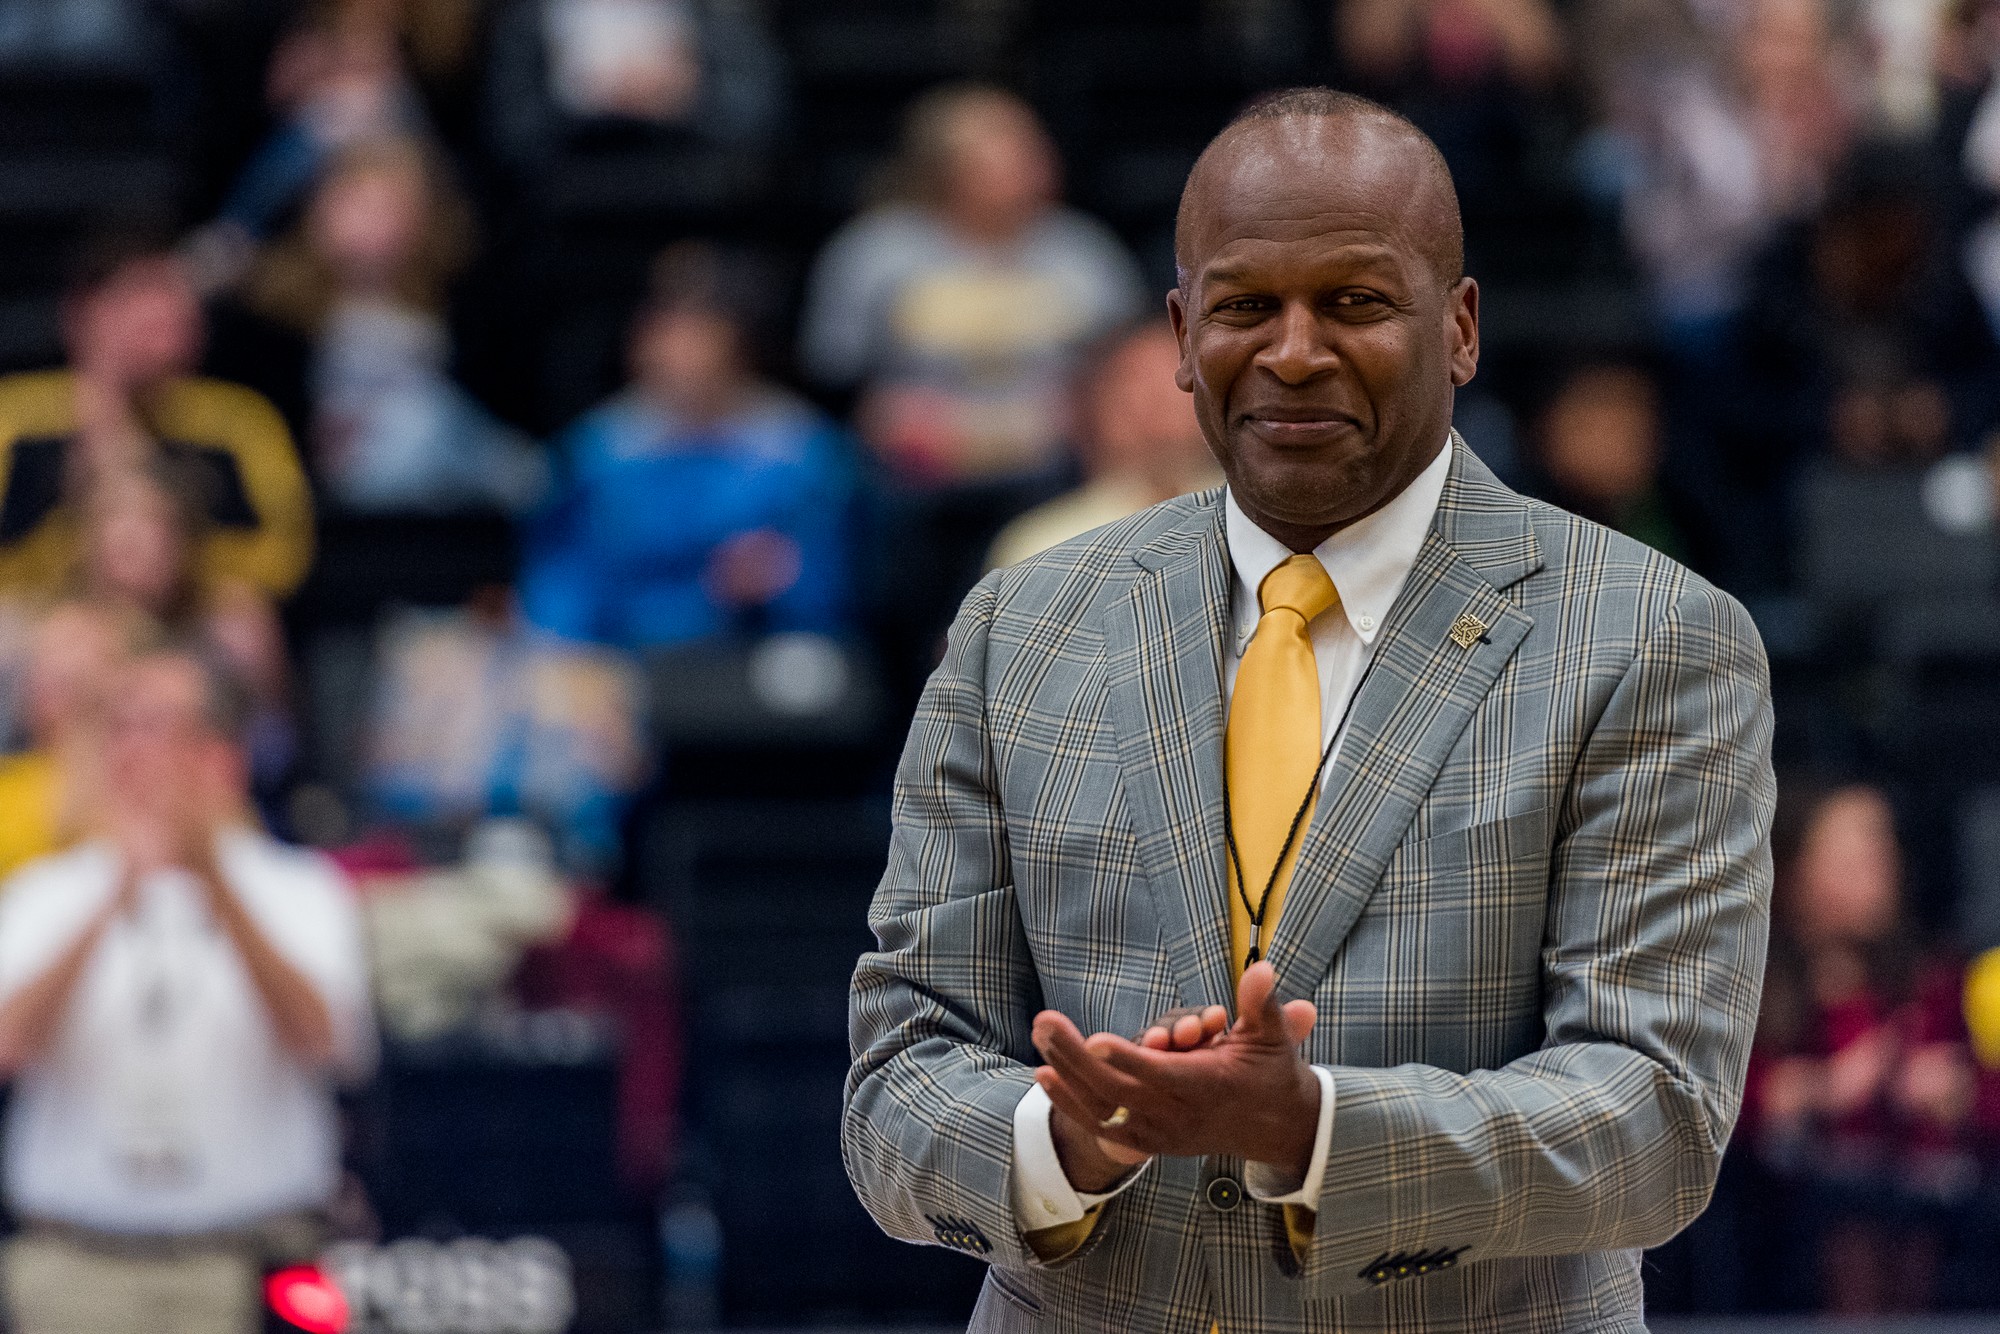 KSU’s Vaughn Williams named ‘Under Armour Director of the Year’